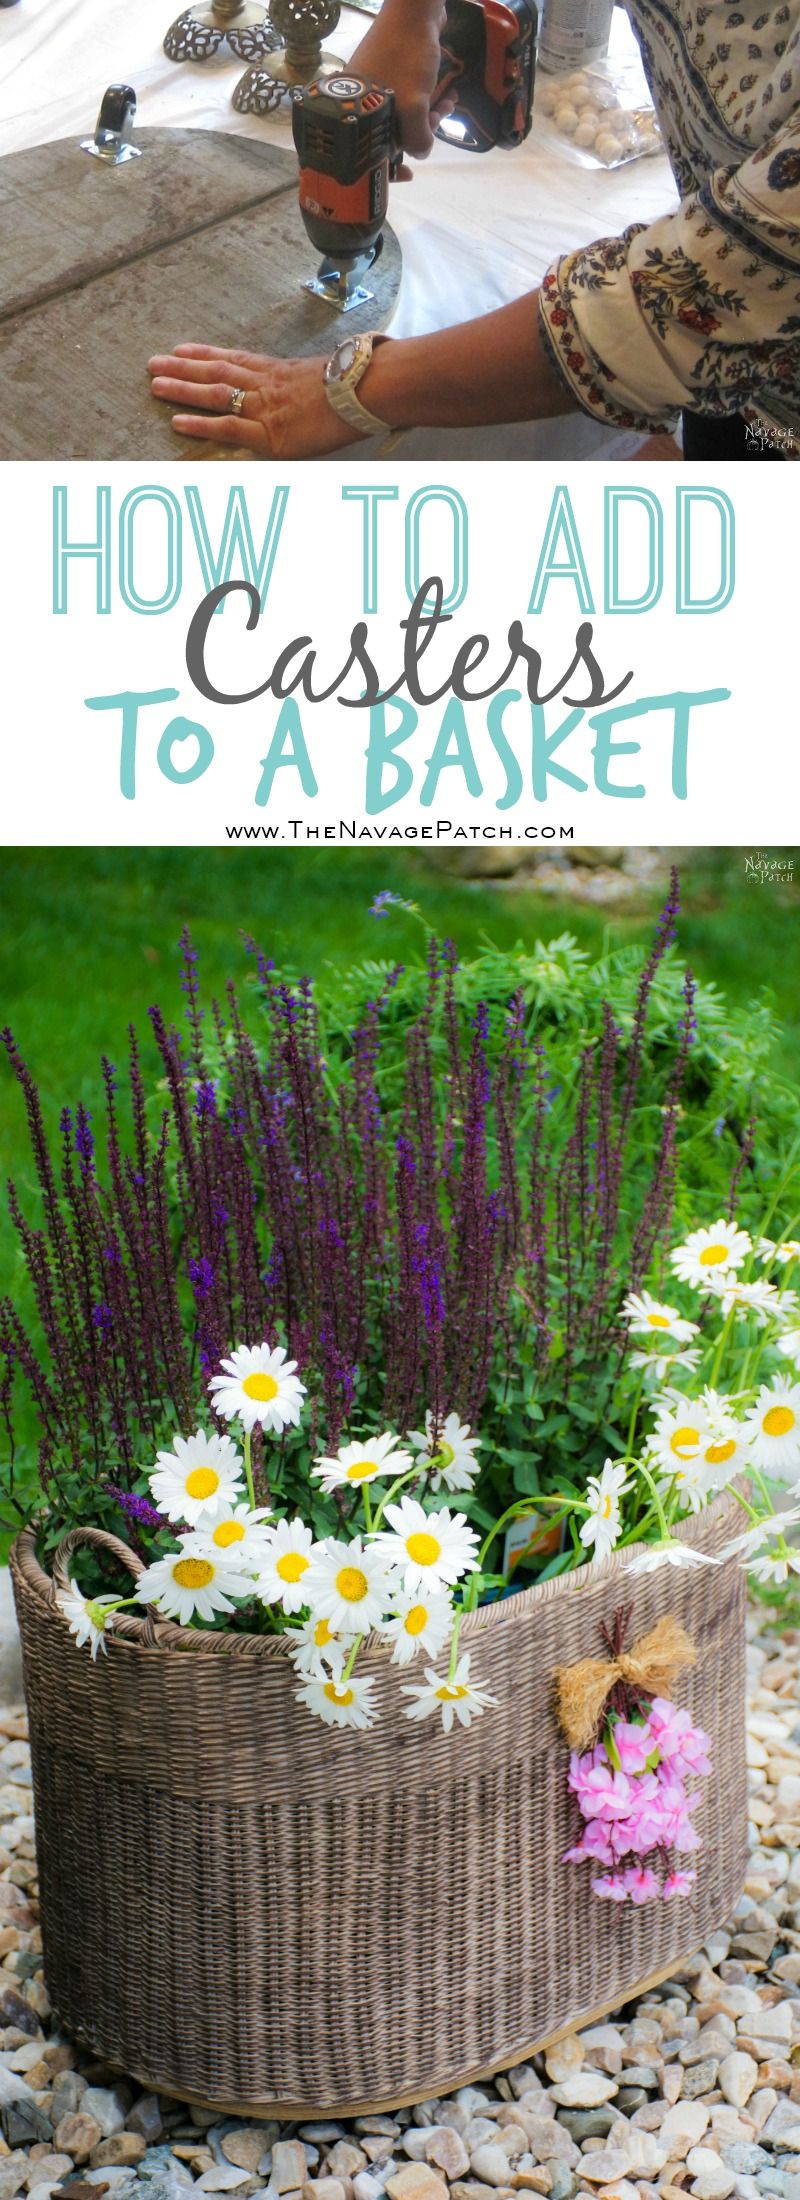 DIY Planter Basket {with casters} | How to add casters to a basket | DIY painted wicker basket planter | Easy and Budget Friendly Home Decor | Upcycled basket | Before & After | TheNavagePatch.com